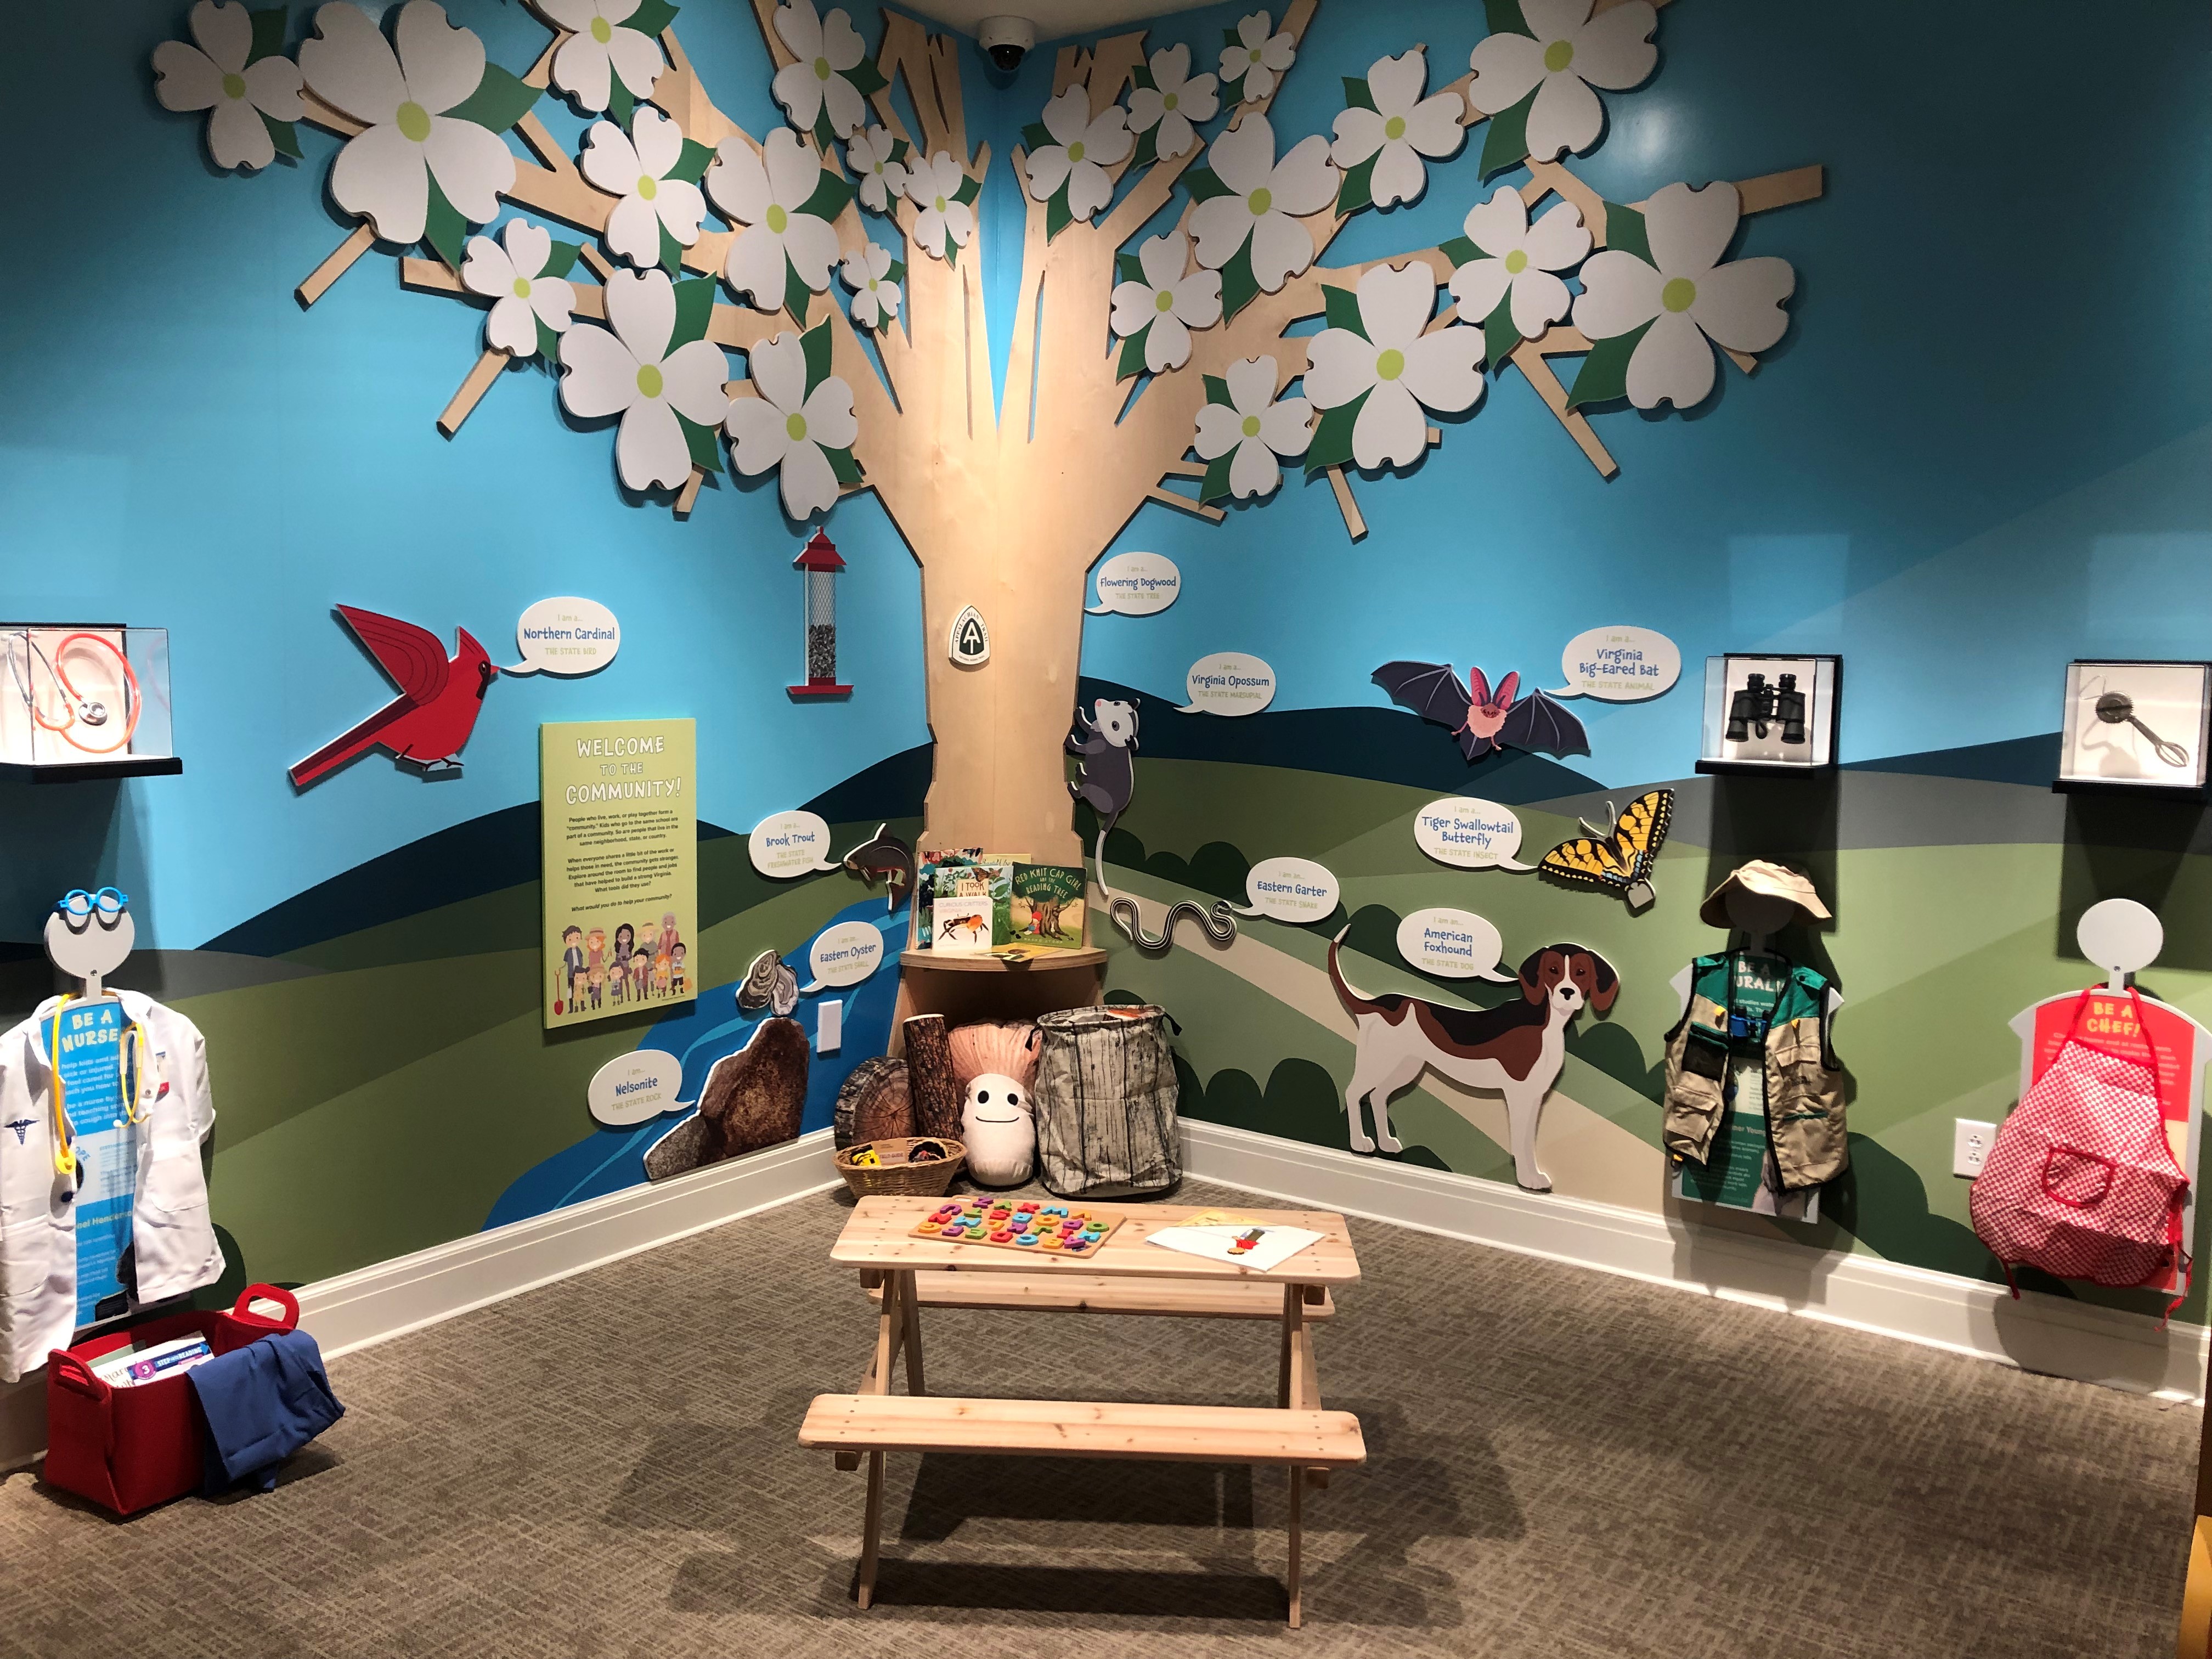 A gallery with a dogwood tree mural, picnic table, and interactive children's costumes